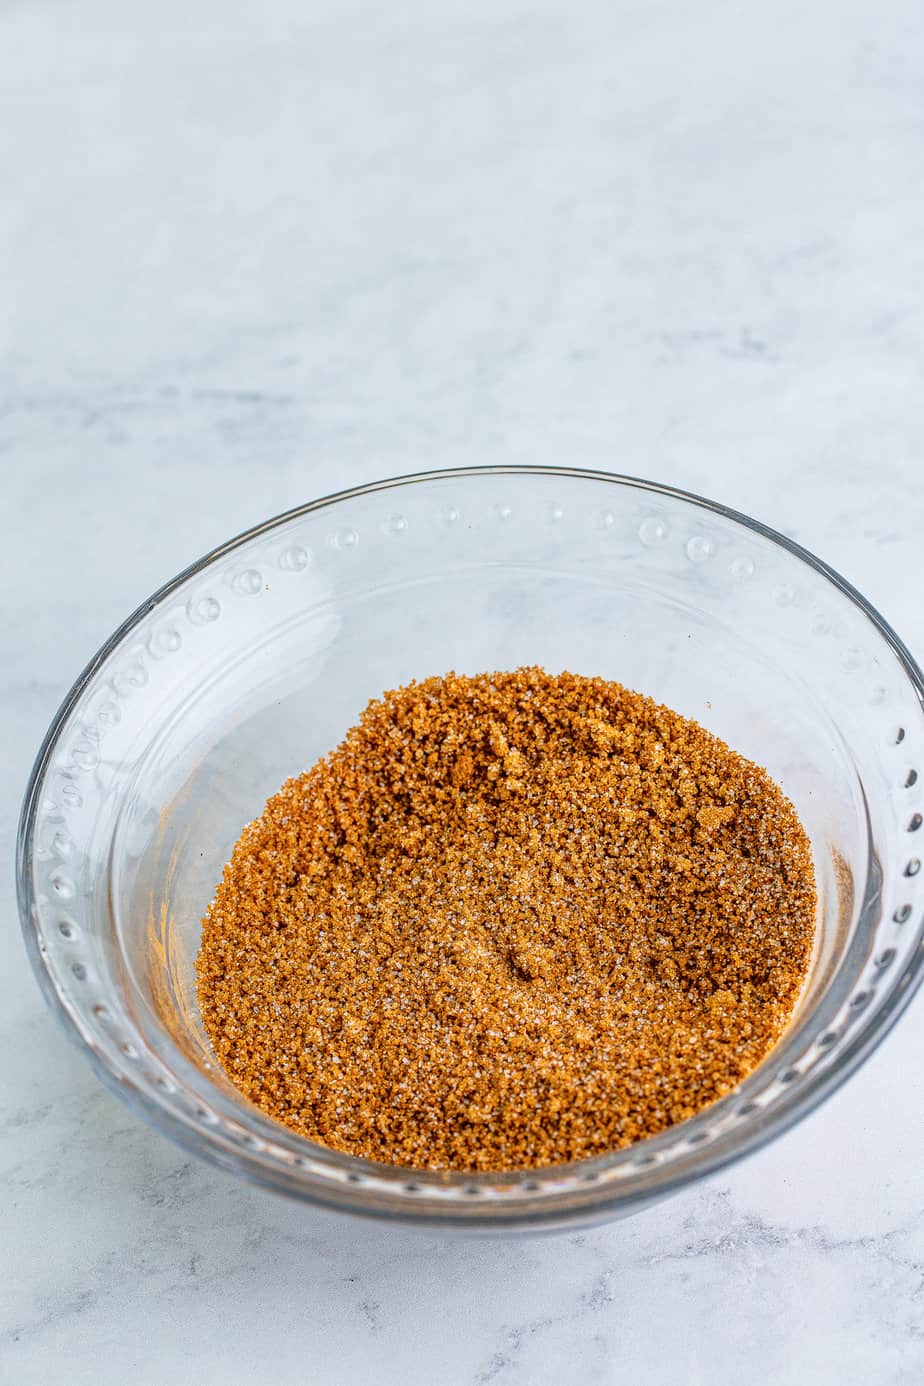 Crunch topping made of cinnamon and brown sugar mixed together in a small bowl from overhead on a counter.